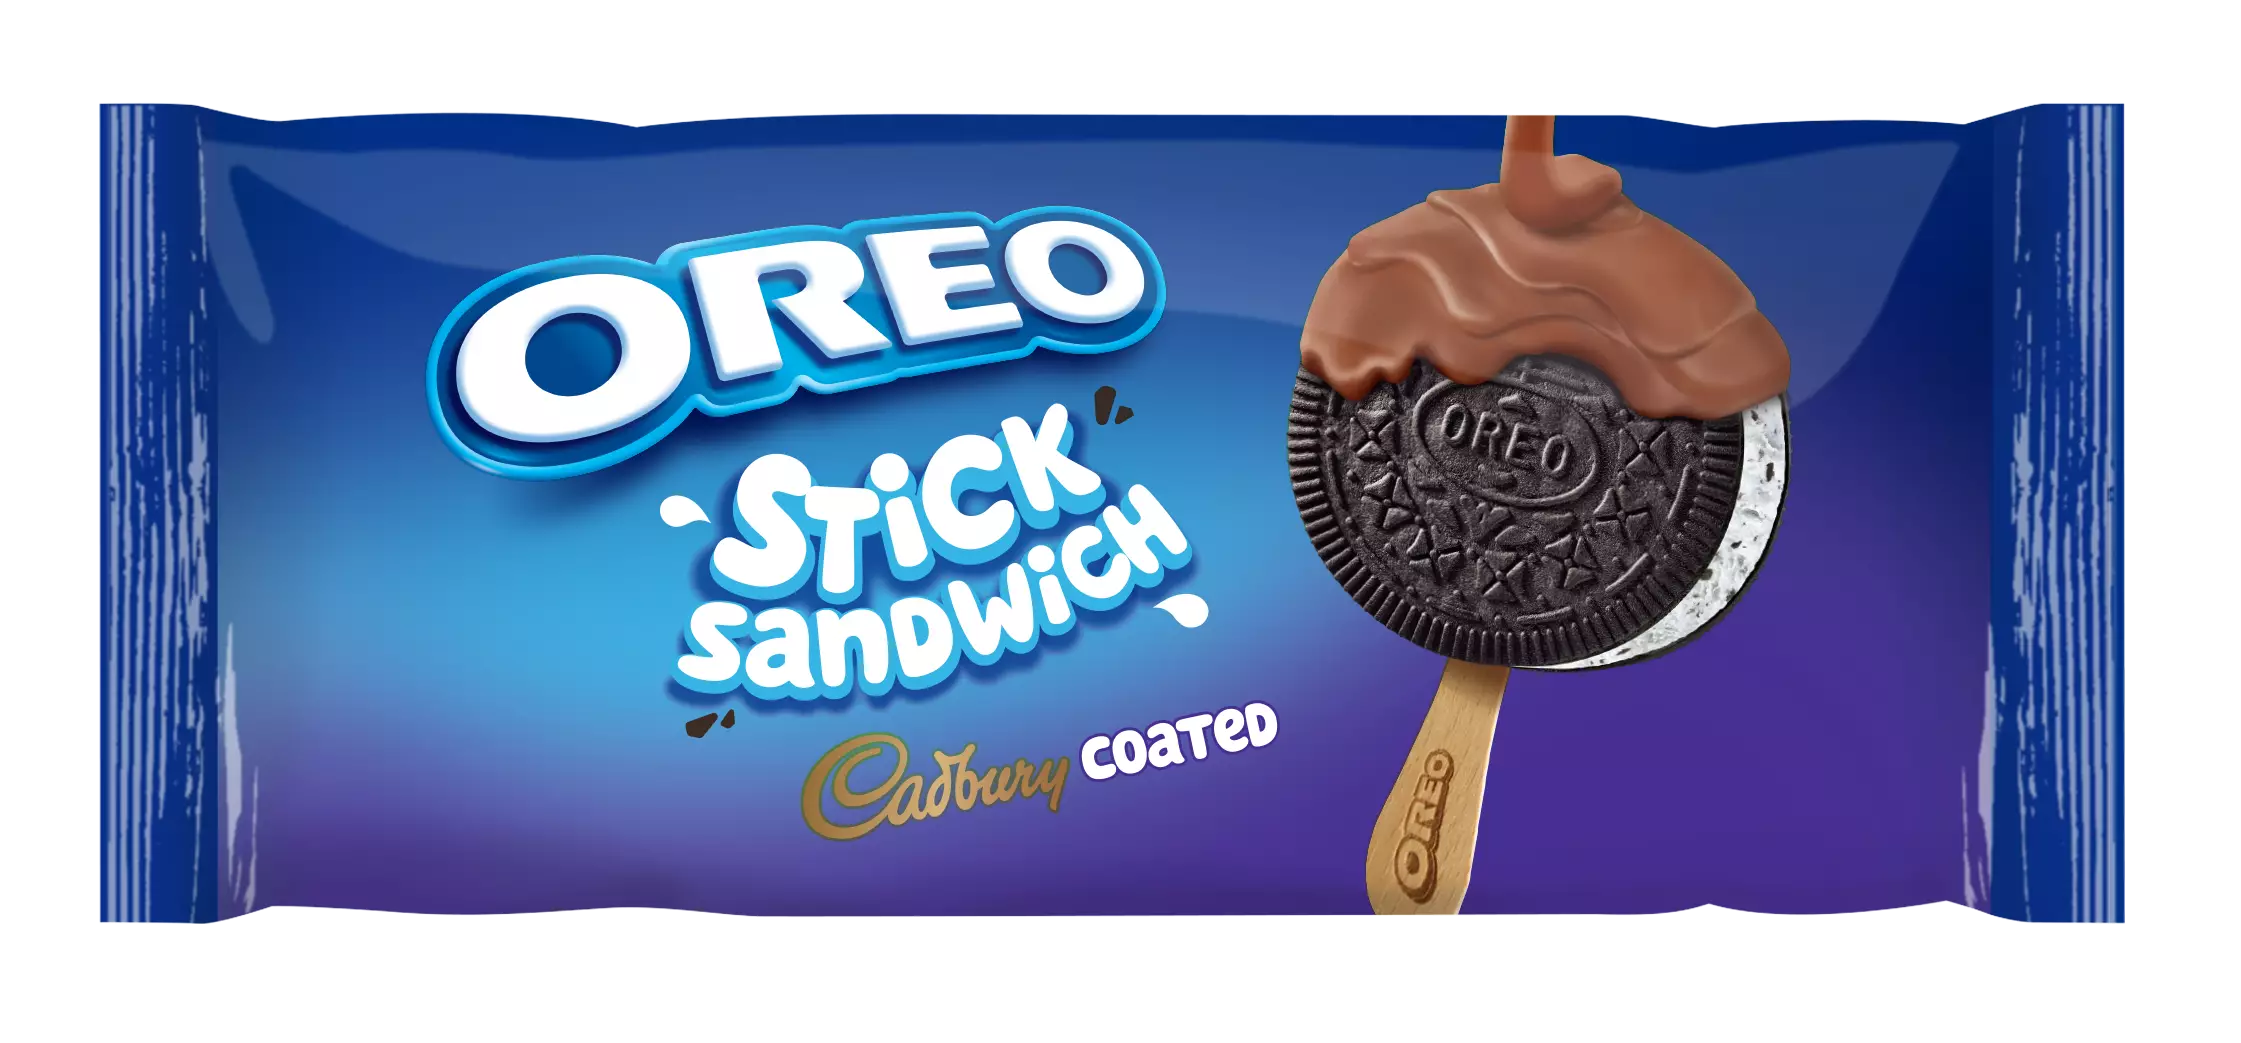 The new Oreo sandwich ice-cream comes with a stick and lashings of milk chocolate (